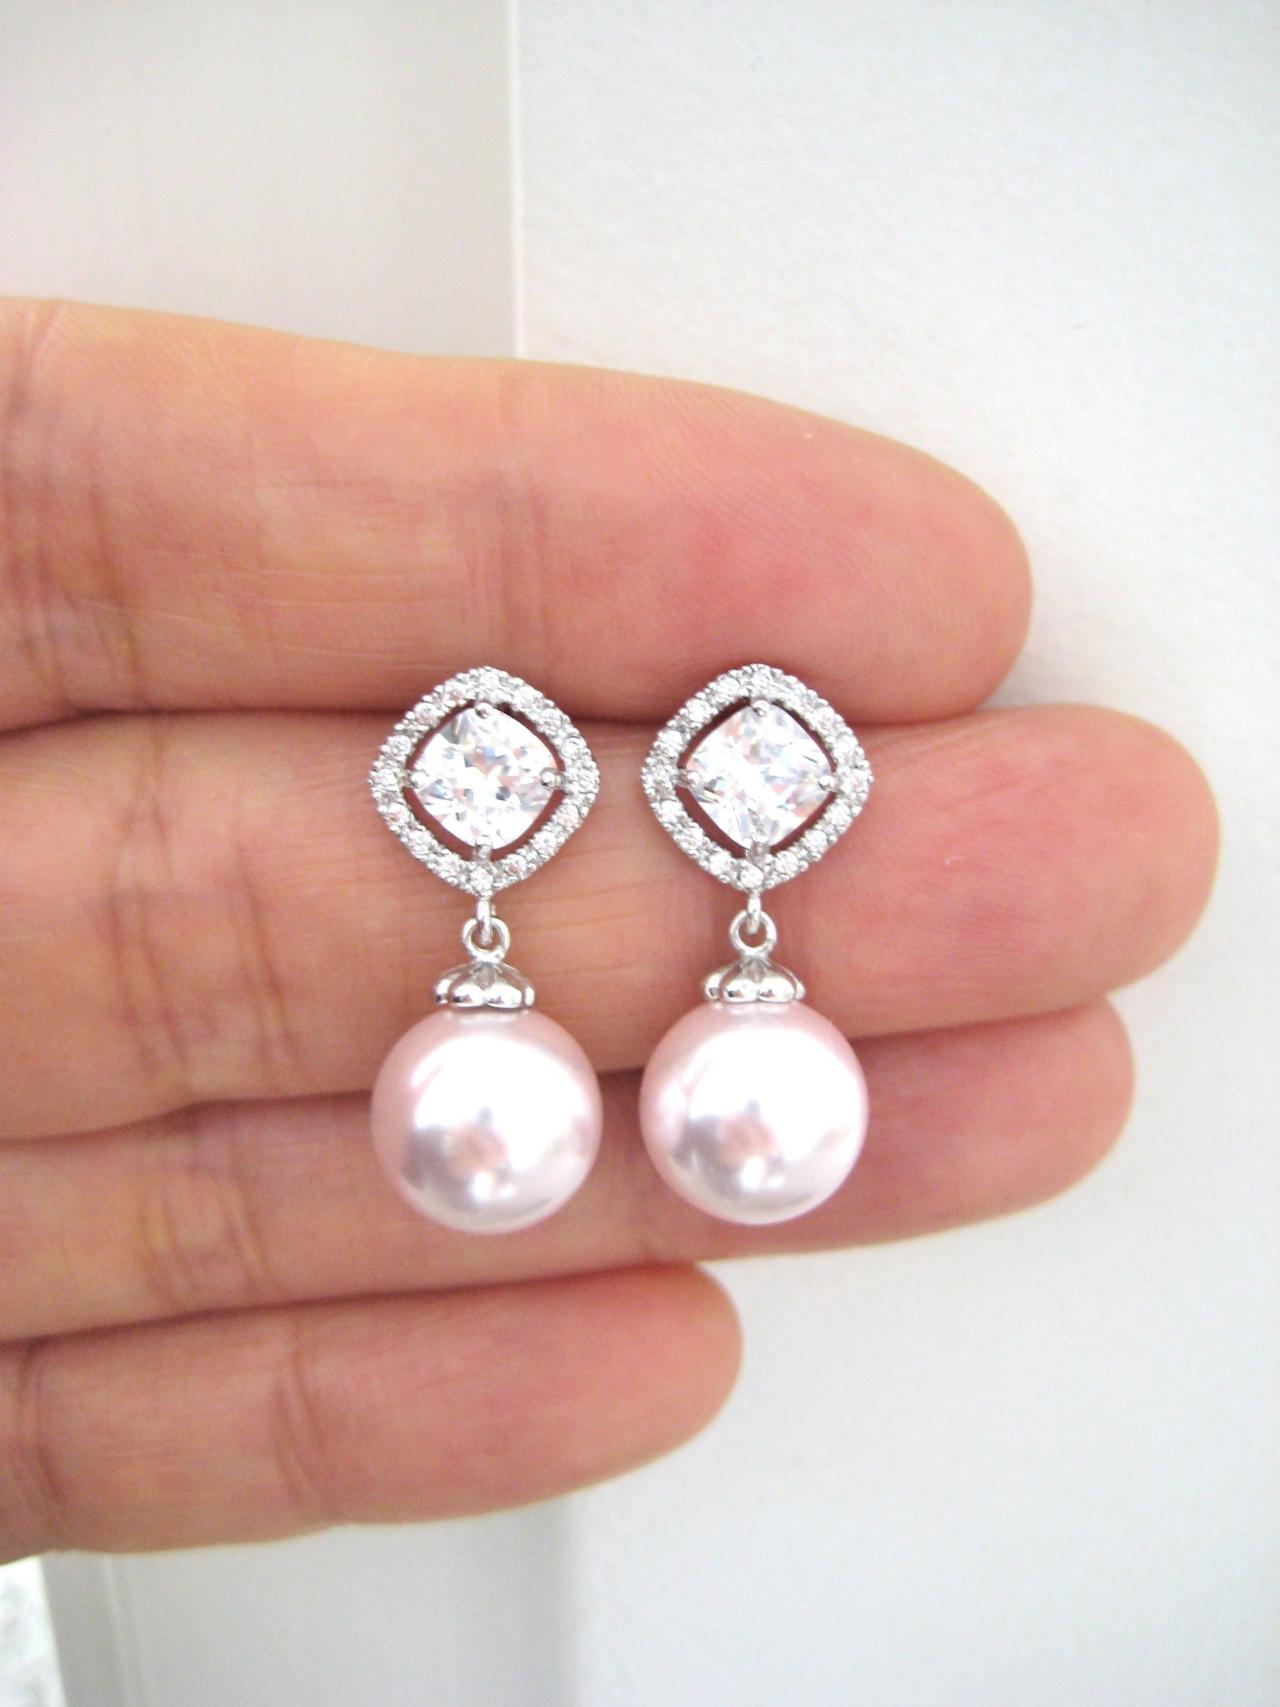 Bridal Pearl Earrings Wedding Pearl Jewelry Swarovski 10mm Round Pearl Cubic Zirconia Earrings Mother Of The Bride Bridesmaid Gift (e152)